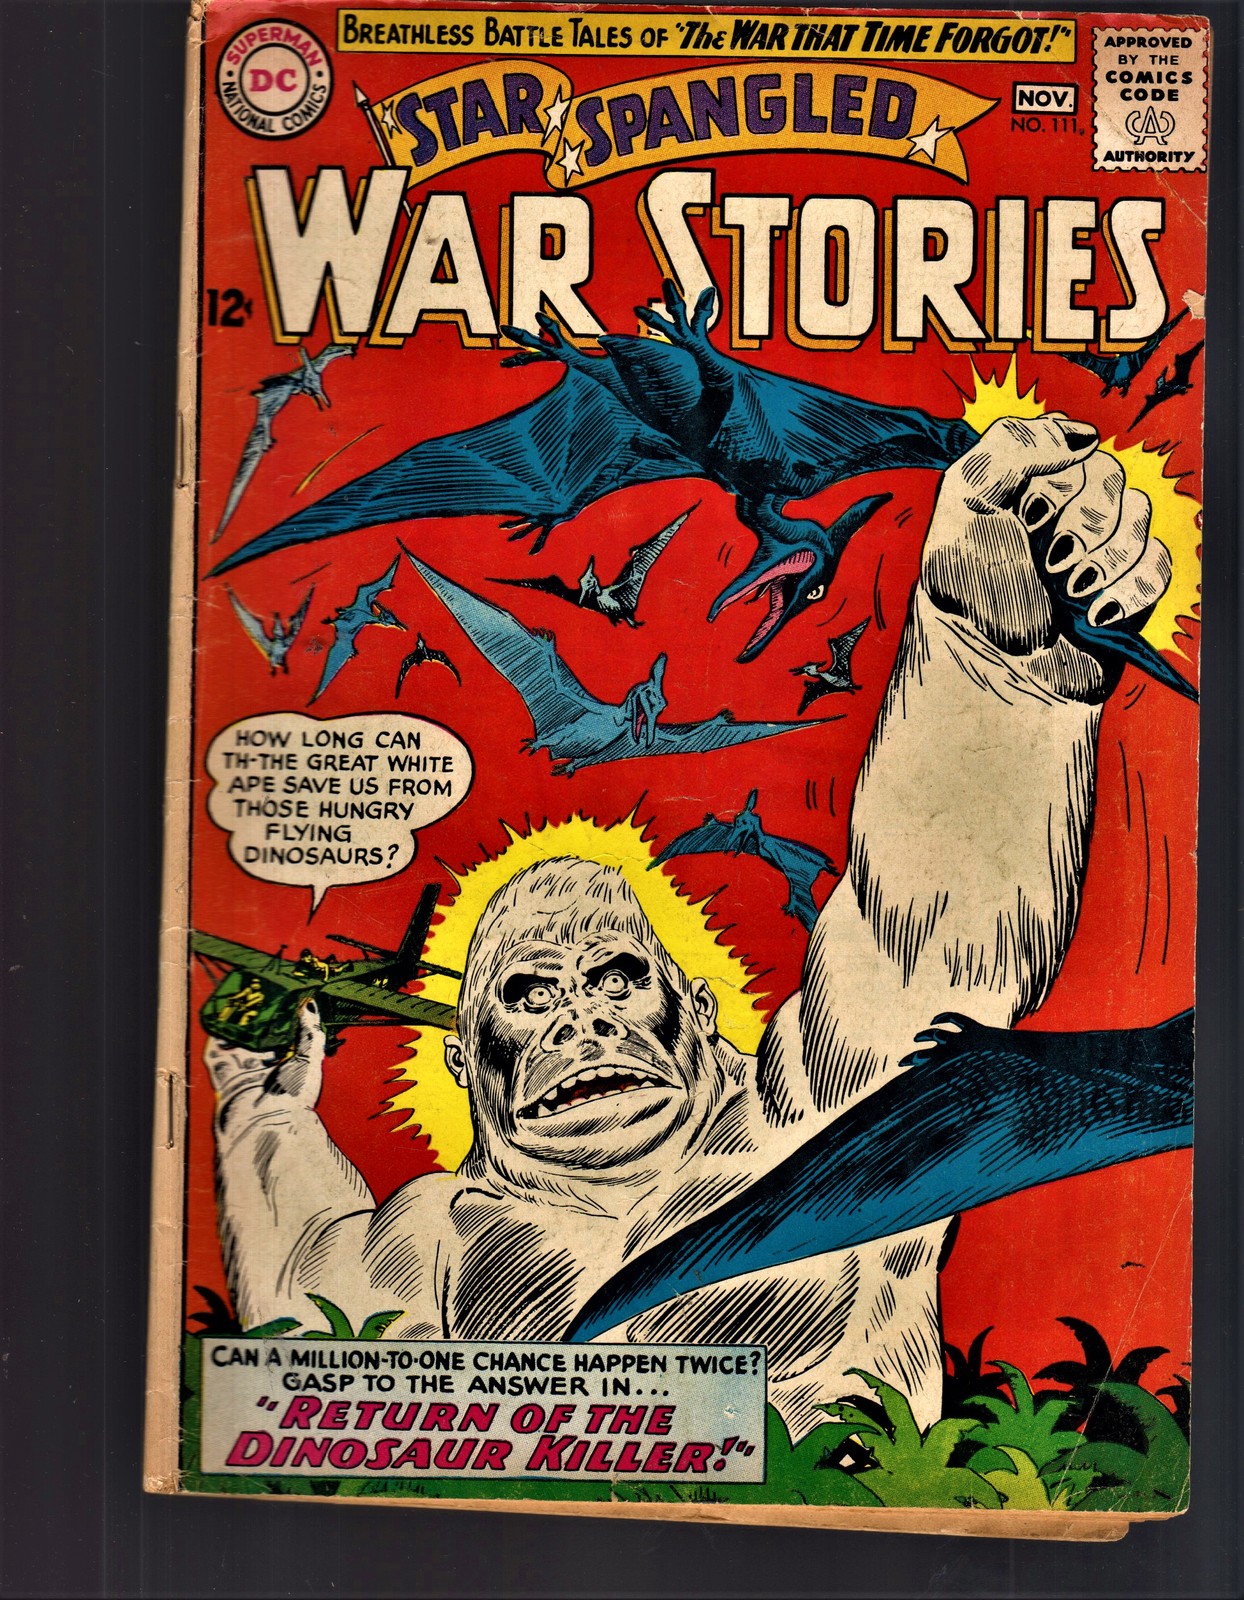 Primary image for Star-Spangled War Stories #111, DC Comics, 1963